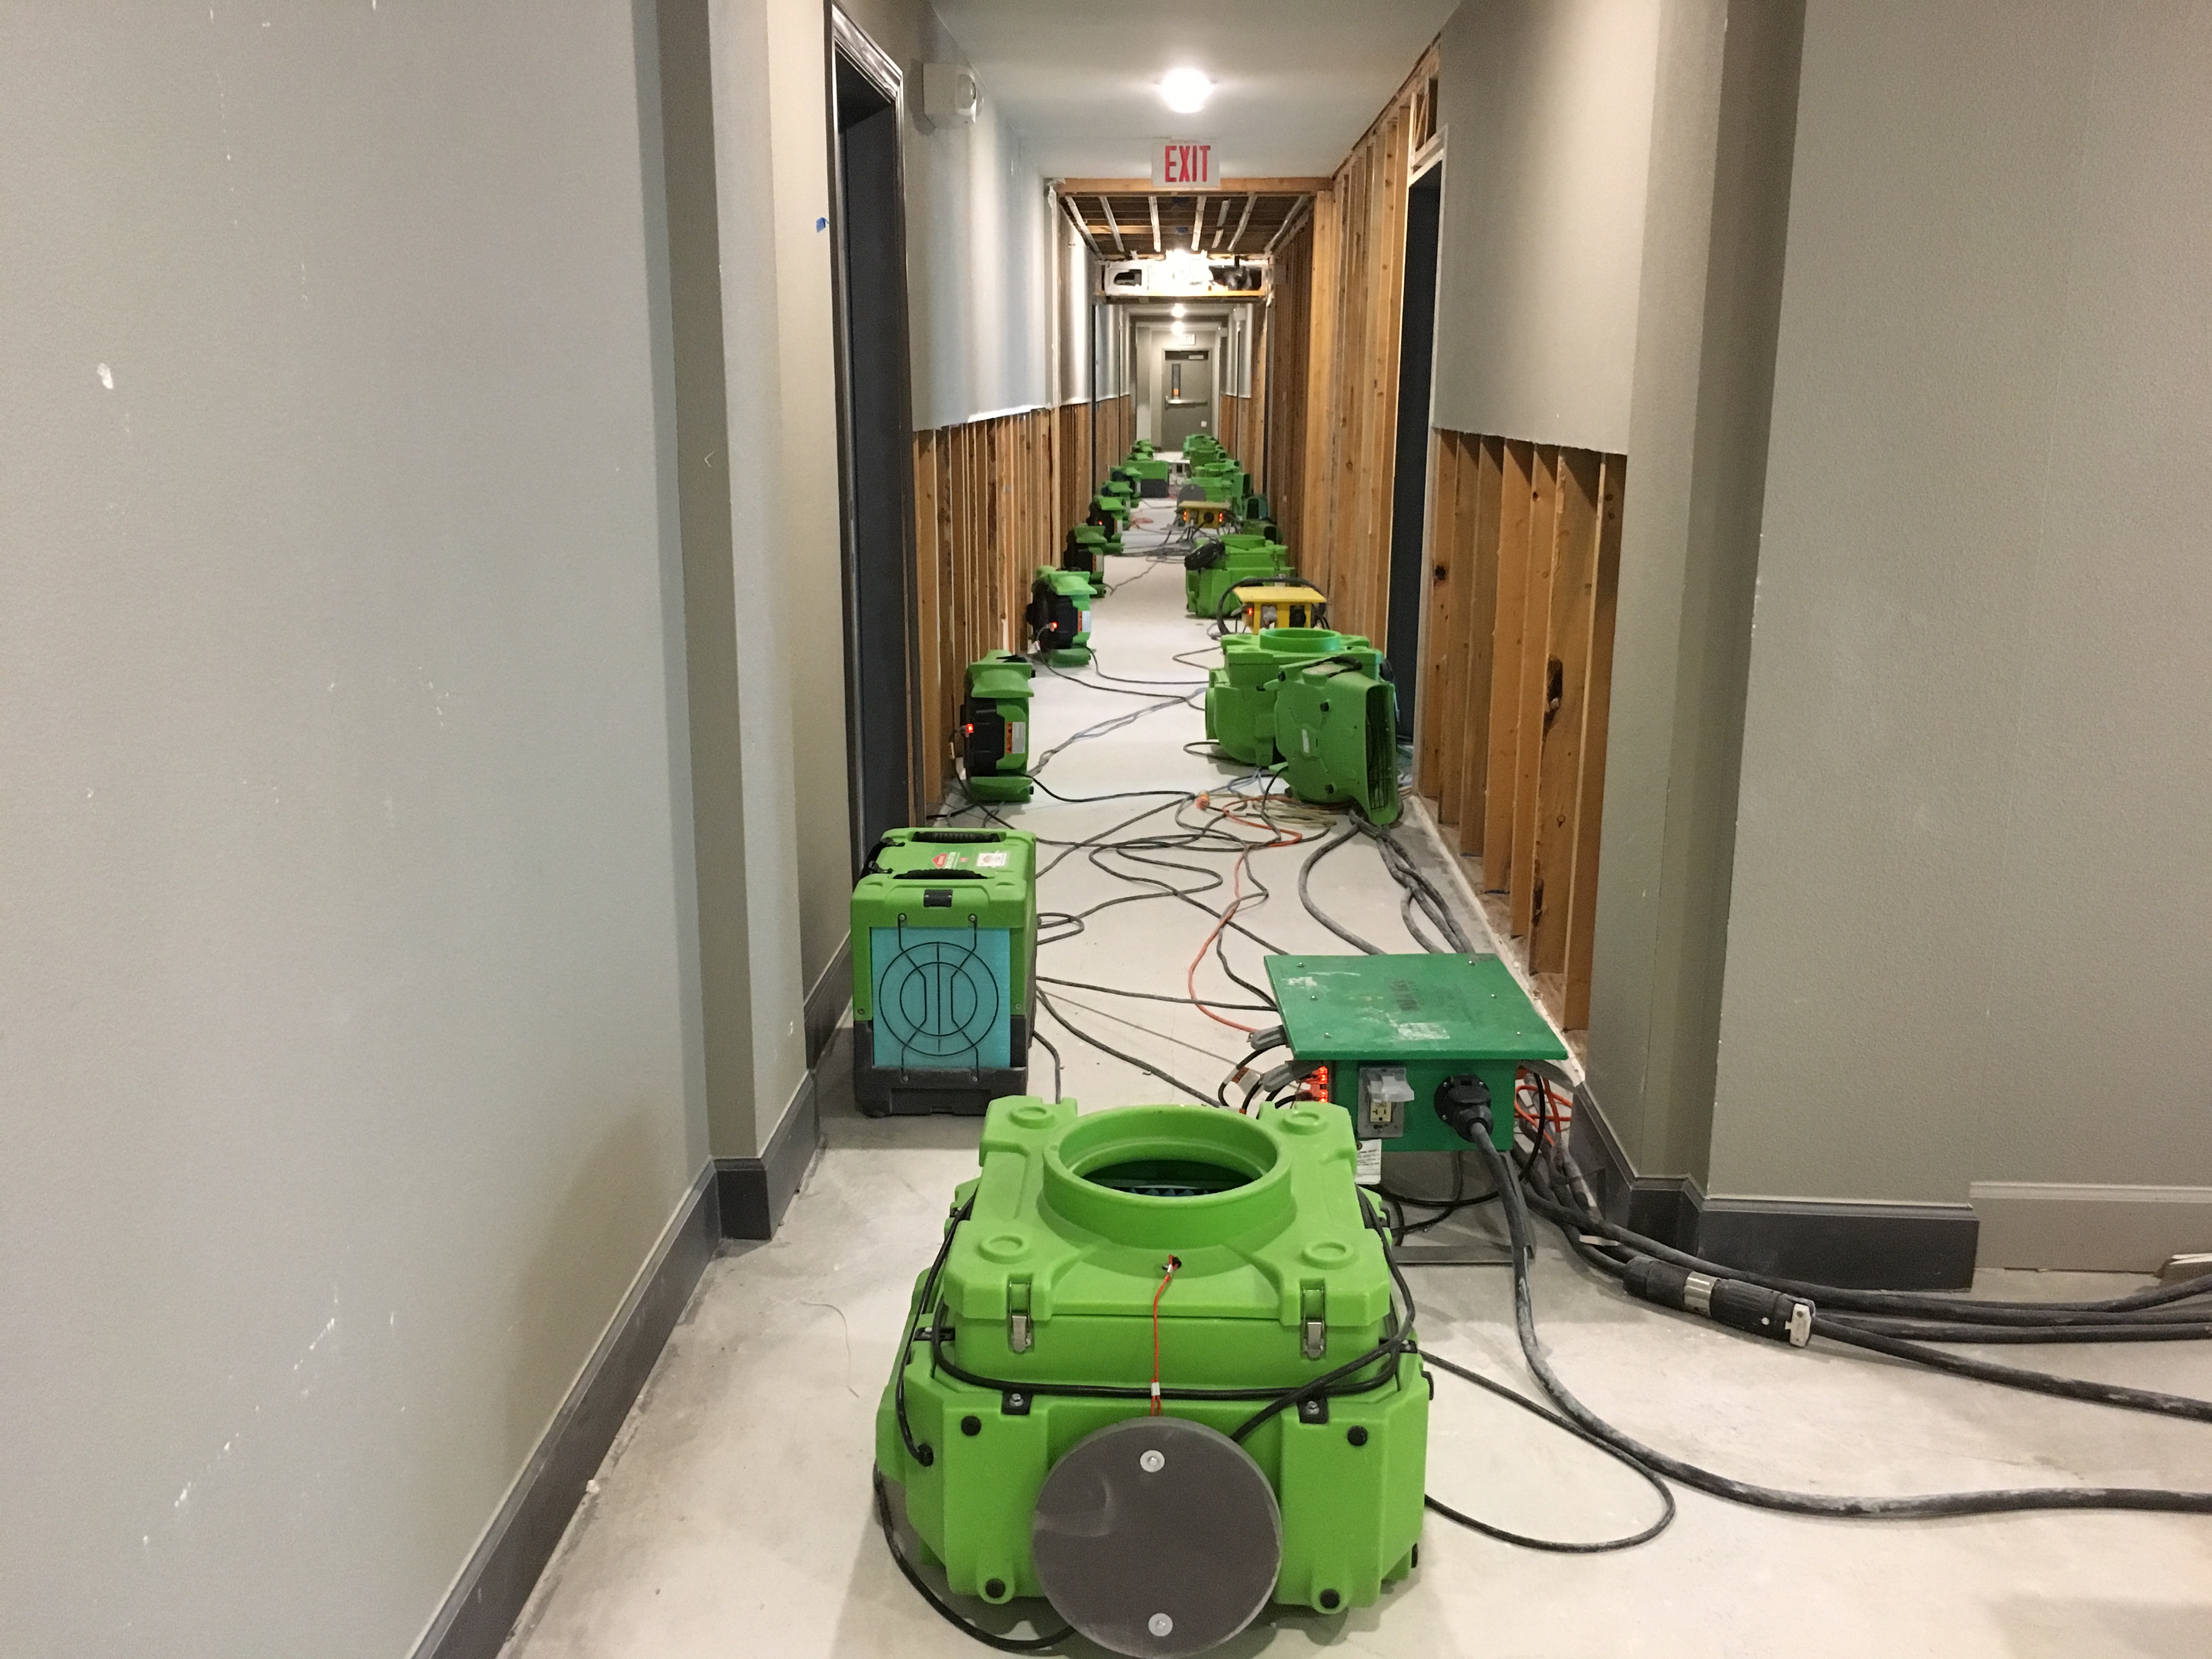 The SERVPRO equipment is up and running after a large commercial loss.